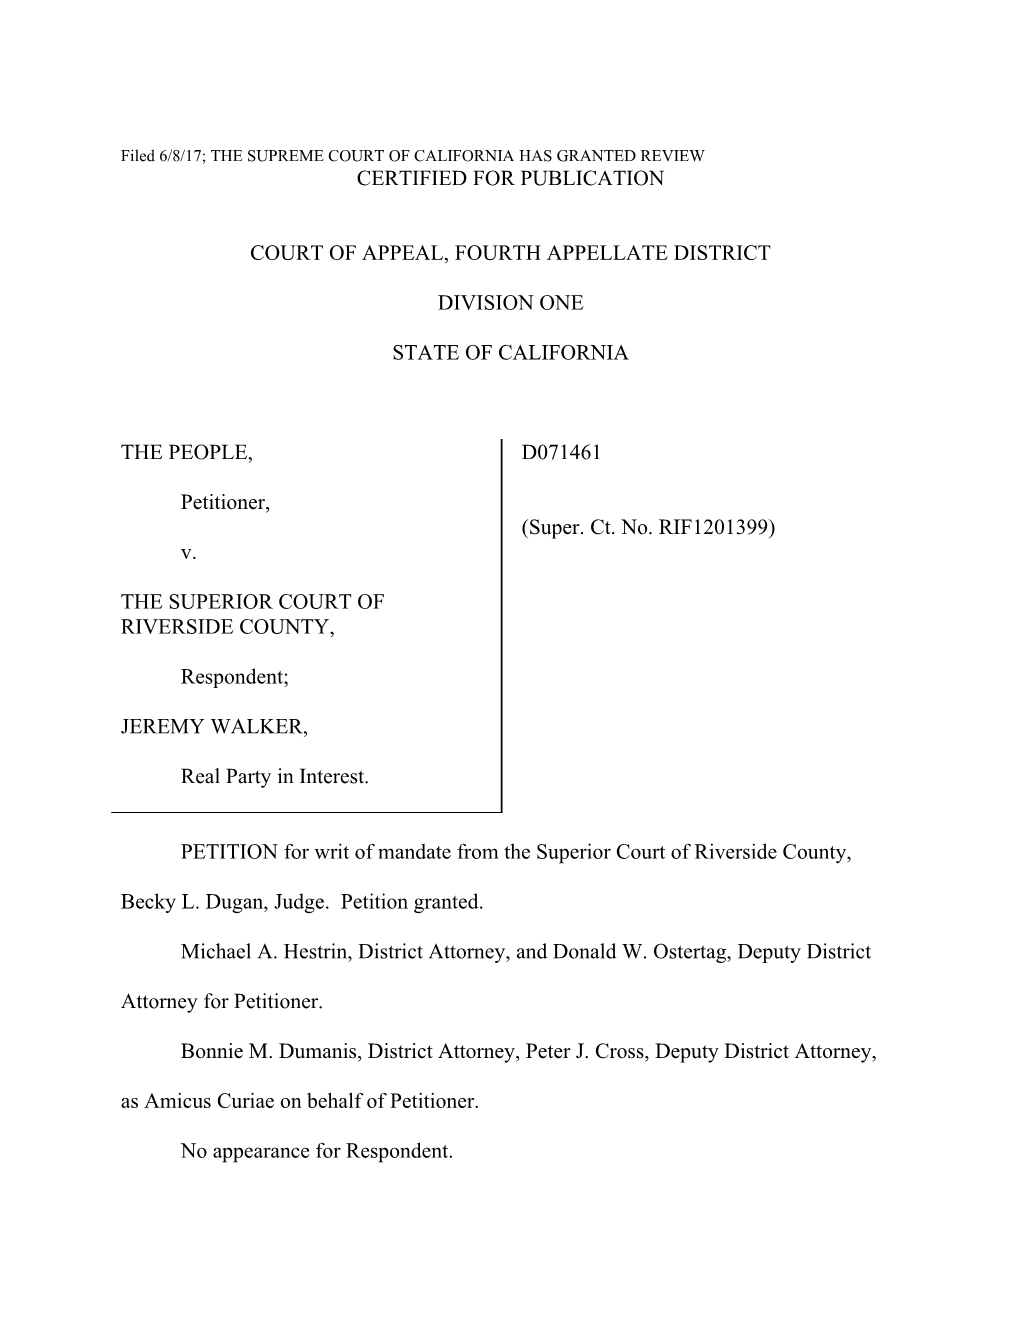 Filed 6/8/17; the SUPREME COURT of CALIFORNIA HAS GRANTED REVIEW